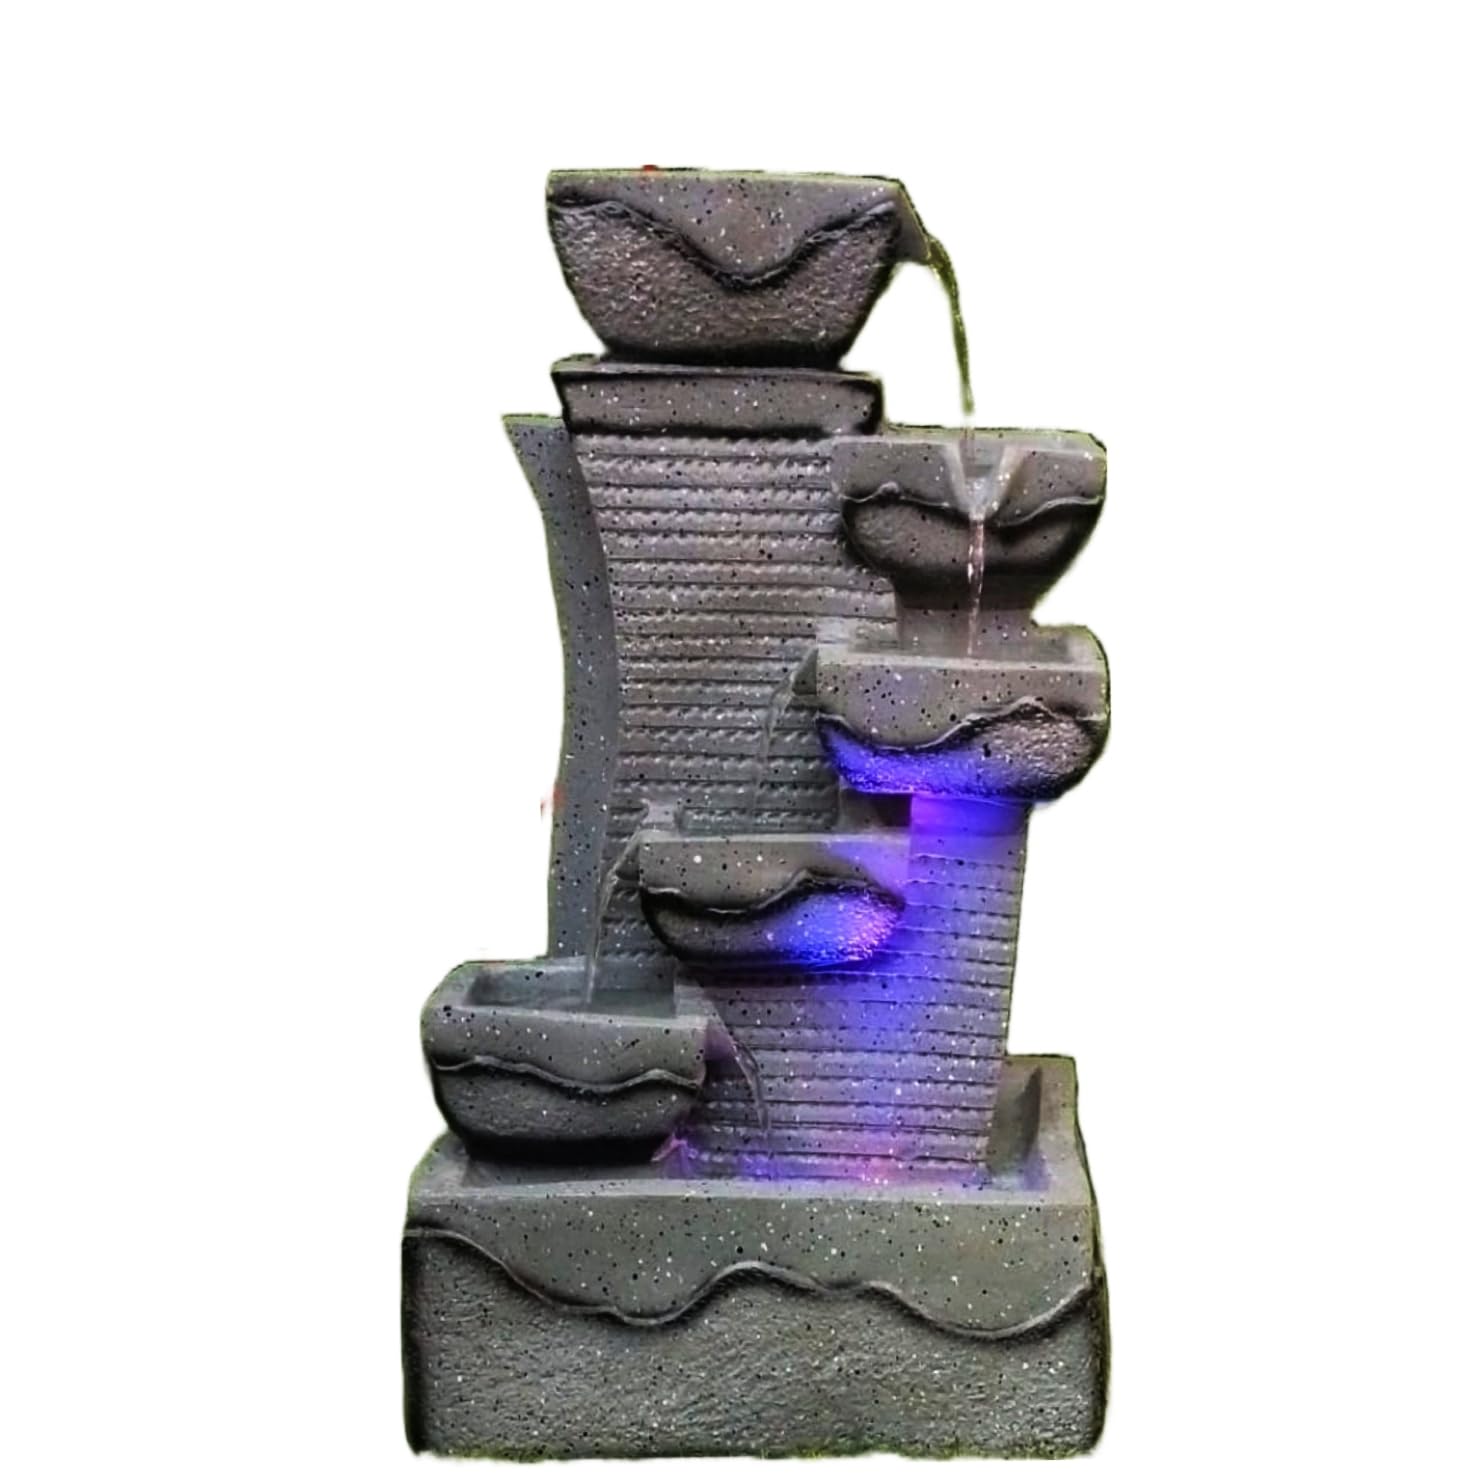 Water Fountain ALiLA Copy of Big Ganesha Diya Waterfall LED Fountain for Office, Table, Living Room, Lawn, Garden Decoration or Gifting item Water Fountain